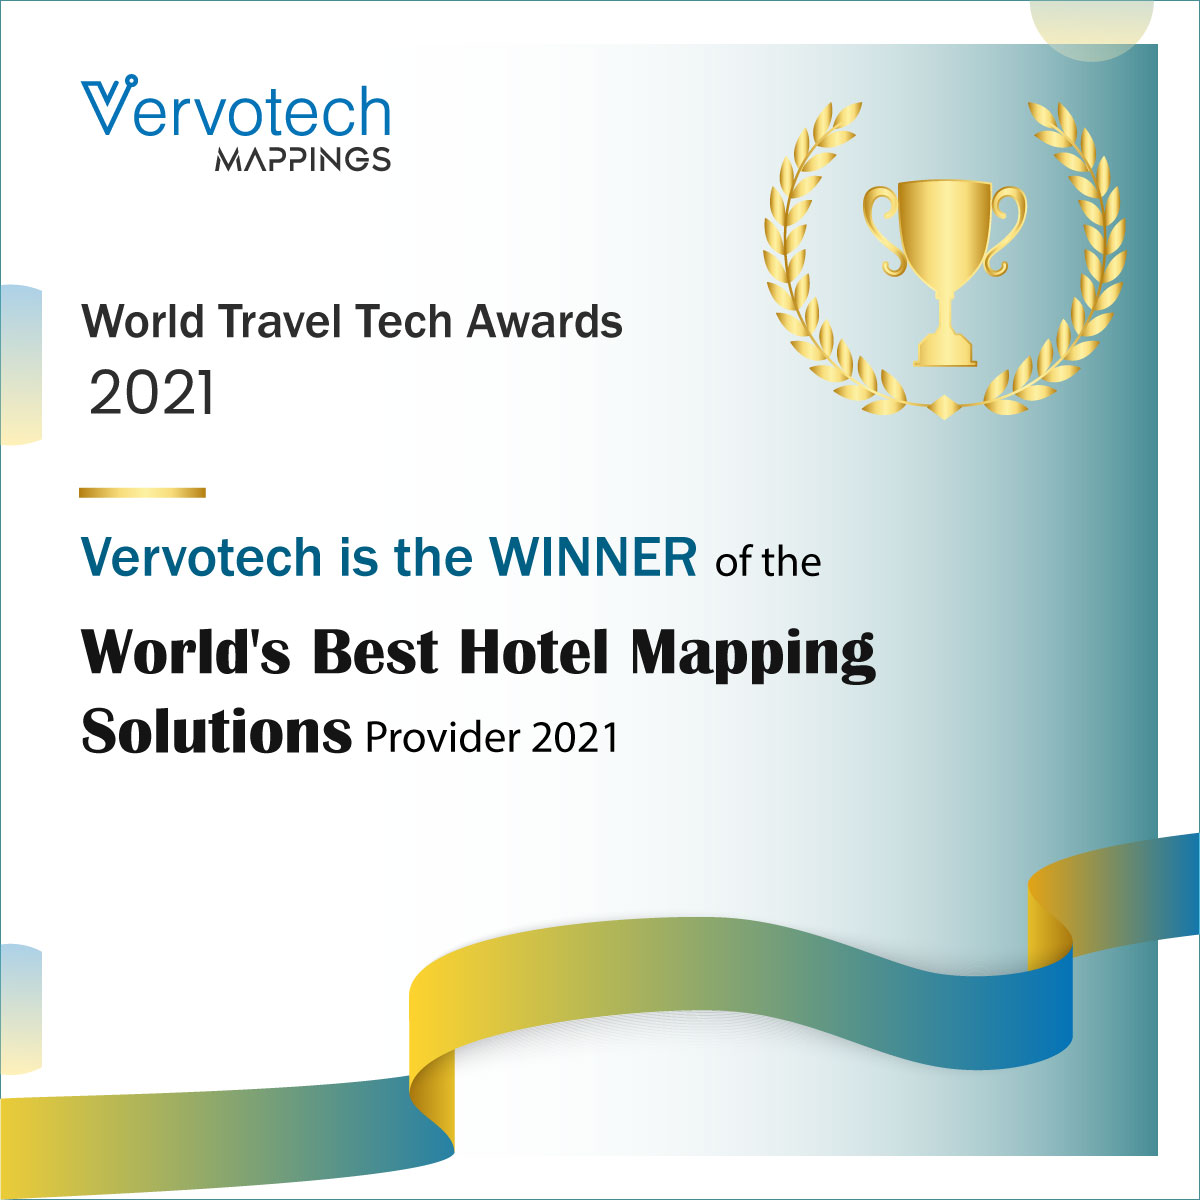 Vervotech announced as the World’s Best Hotel Mapping Solutions Provider 2021 by World Travel Tech Awards